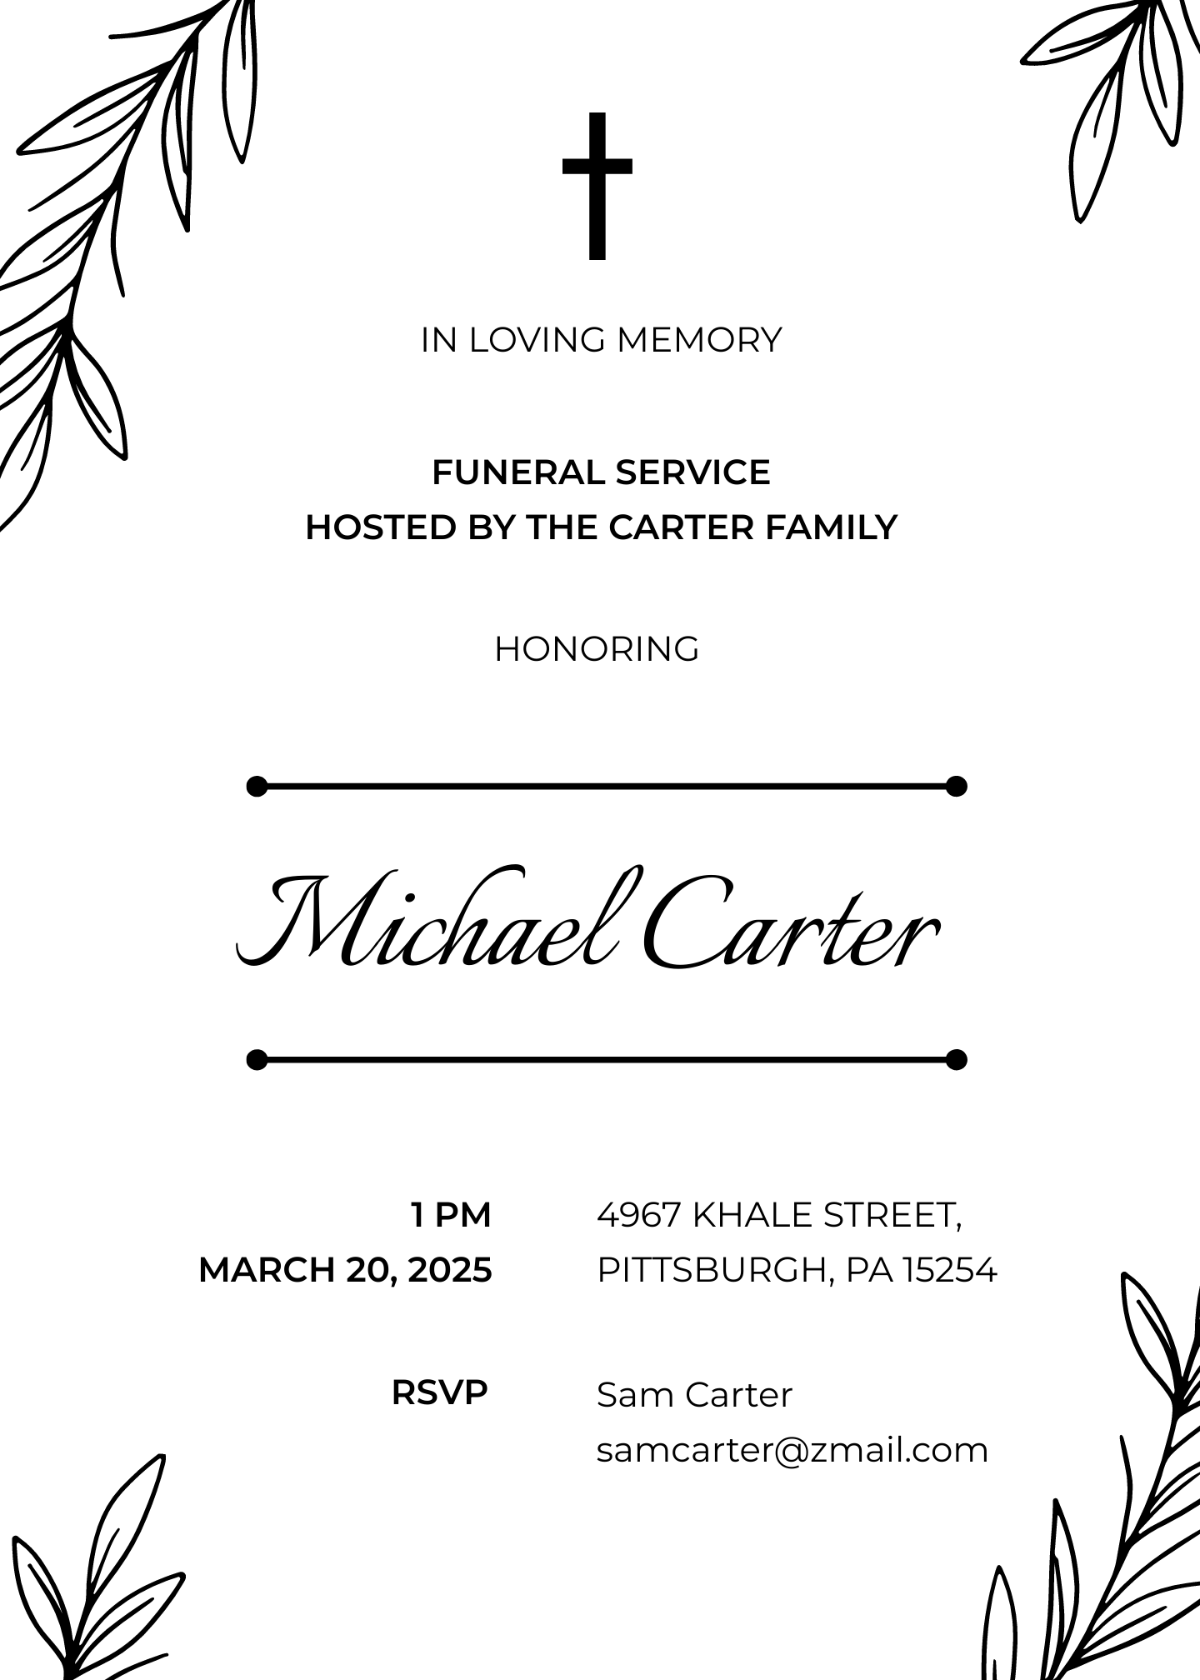 Email Funeral Service Invitation Template